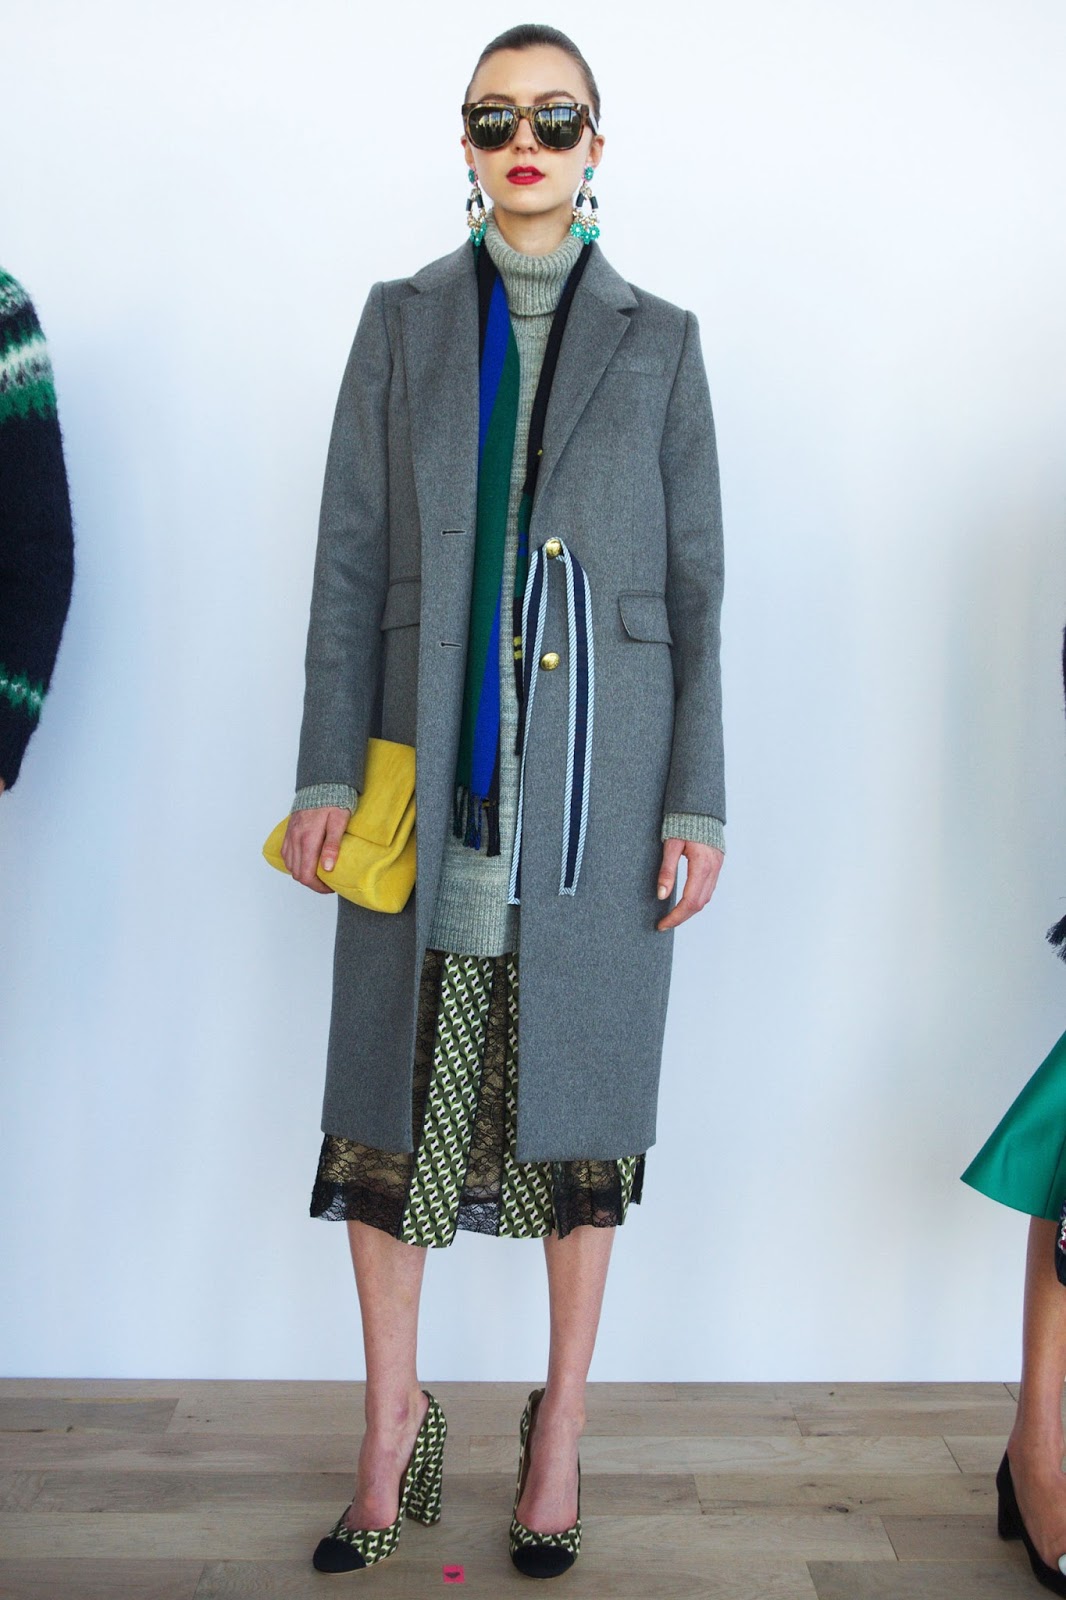 FIRST LOOK: J. Crew's Fall 2016 Collection - NYC Recessionista